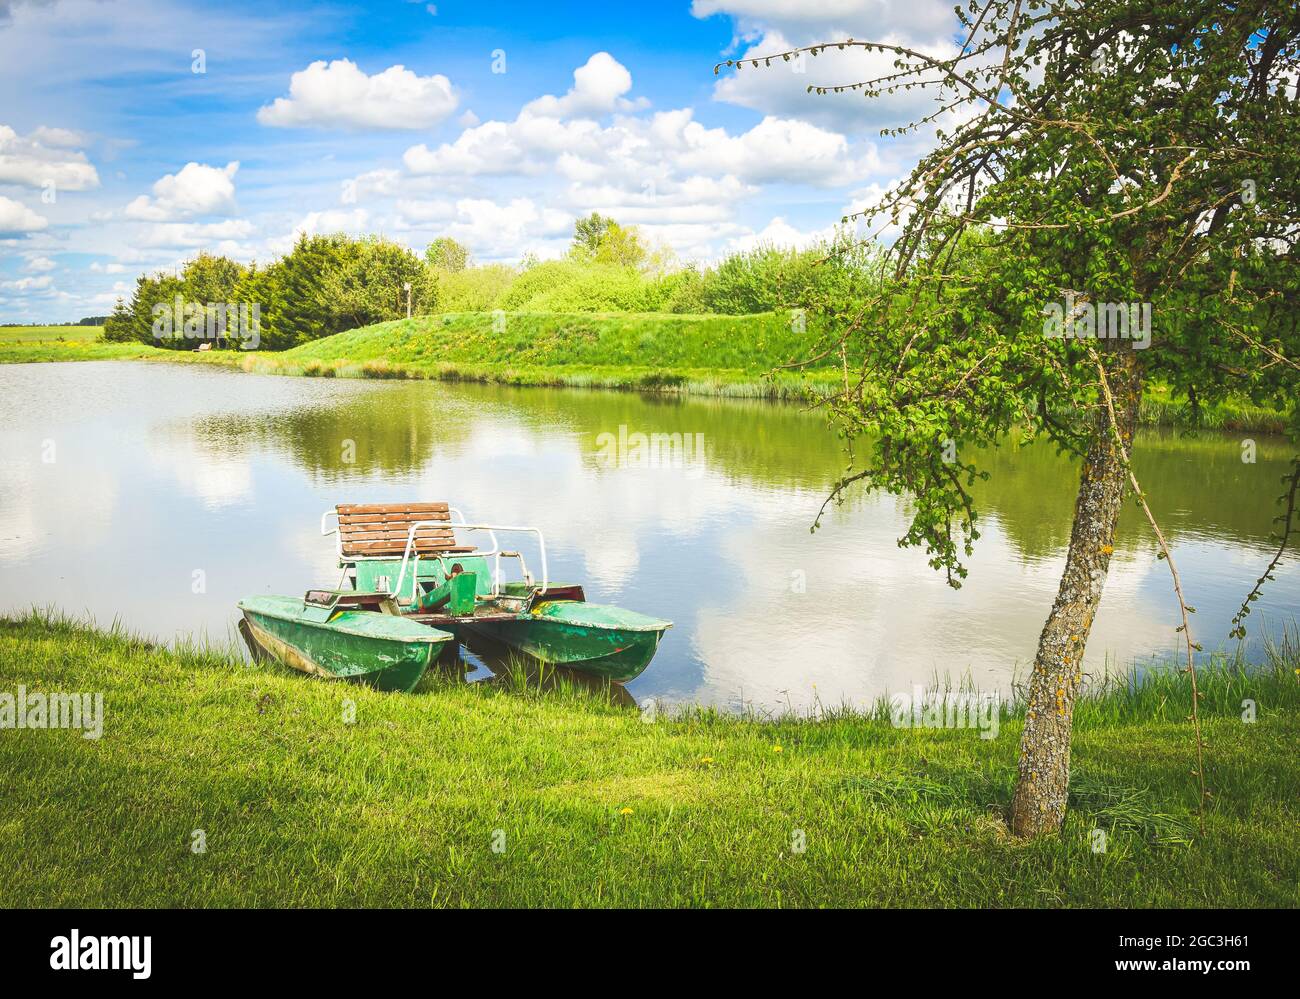 Green pedalo standing in private lake in sunny day in Lithuania countryside. Leisure activities outdoors concept. Stock Photo